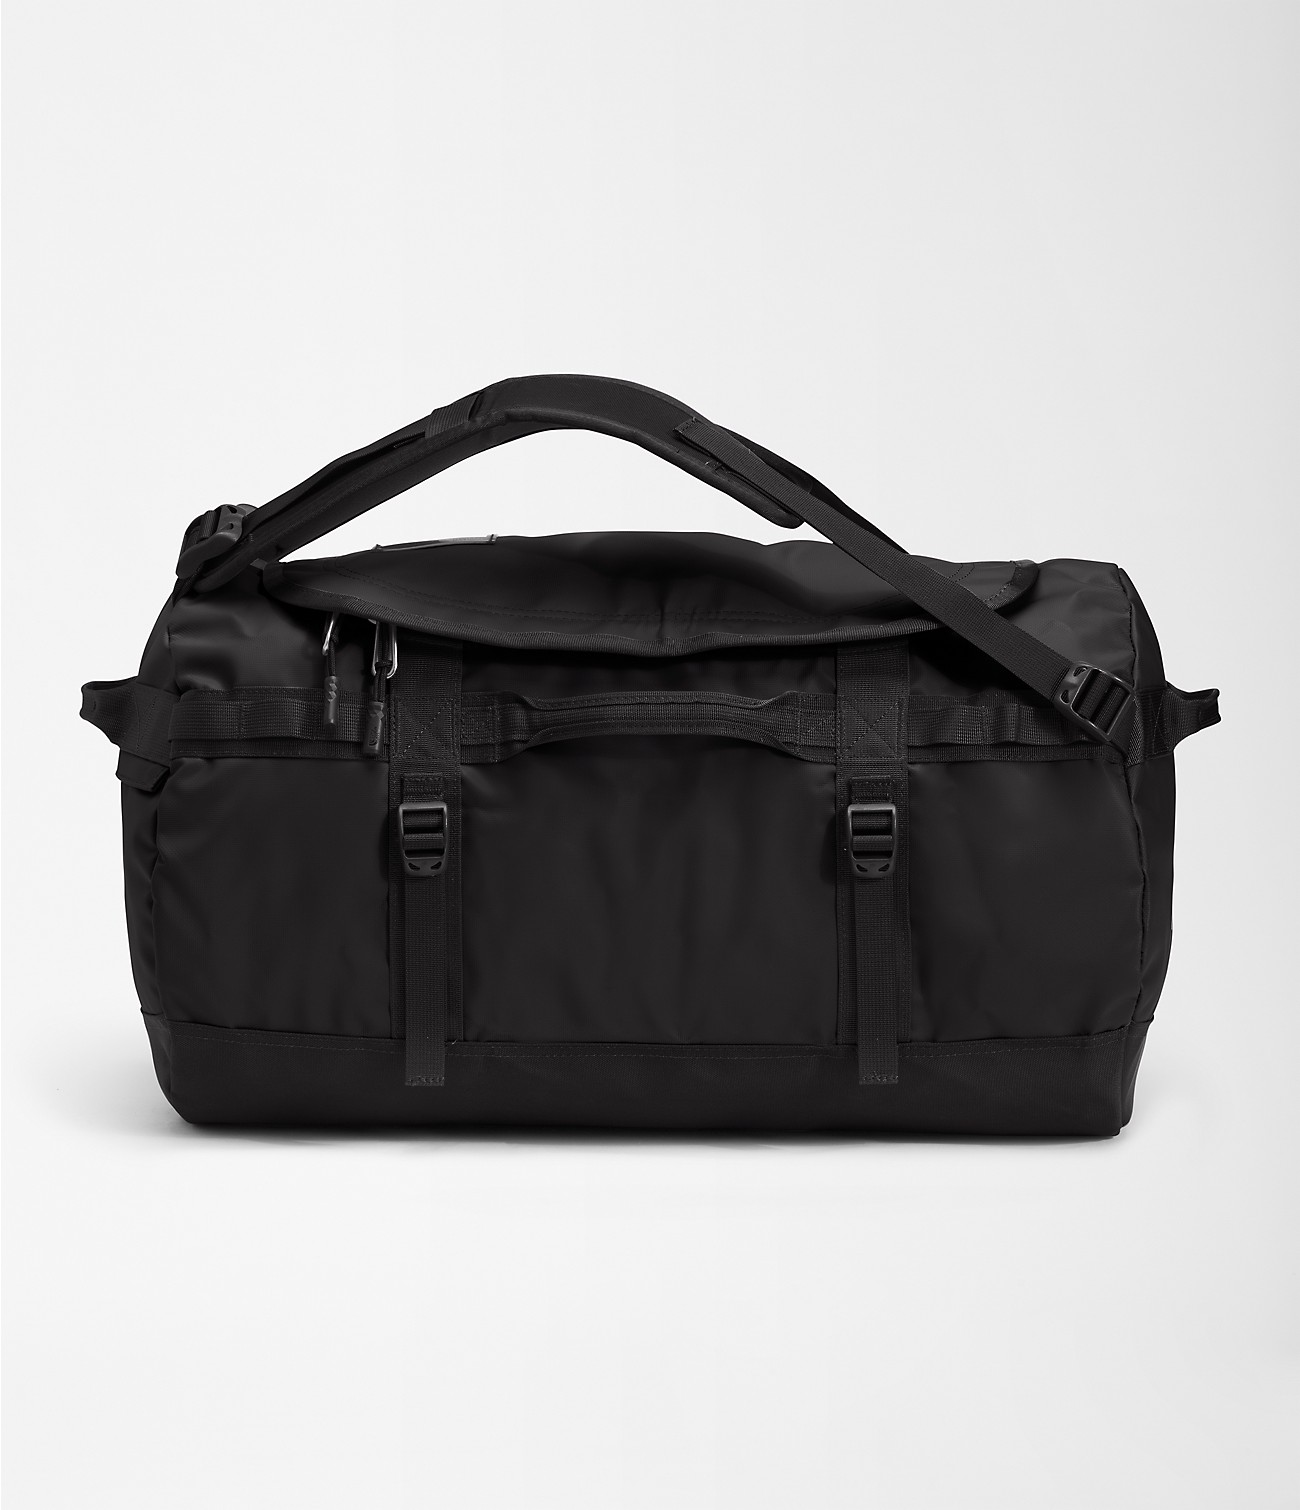 Unlock Wilderness' choice in the Eastpak Vs North Face comparison, the Base Camp Duffel by The North Face